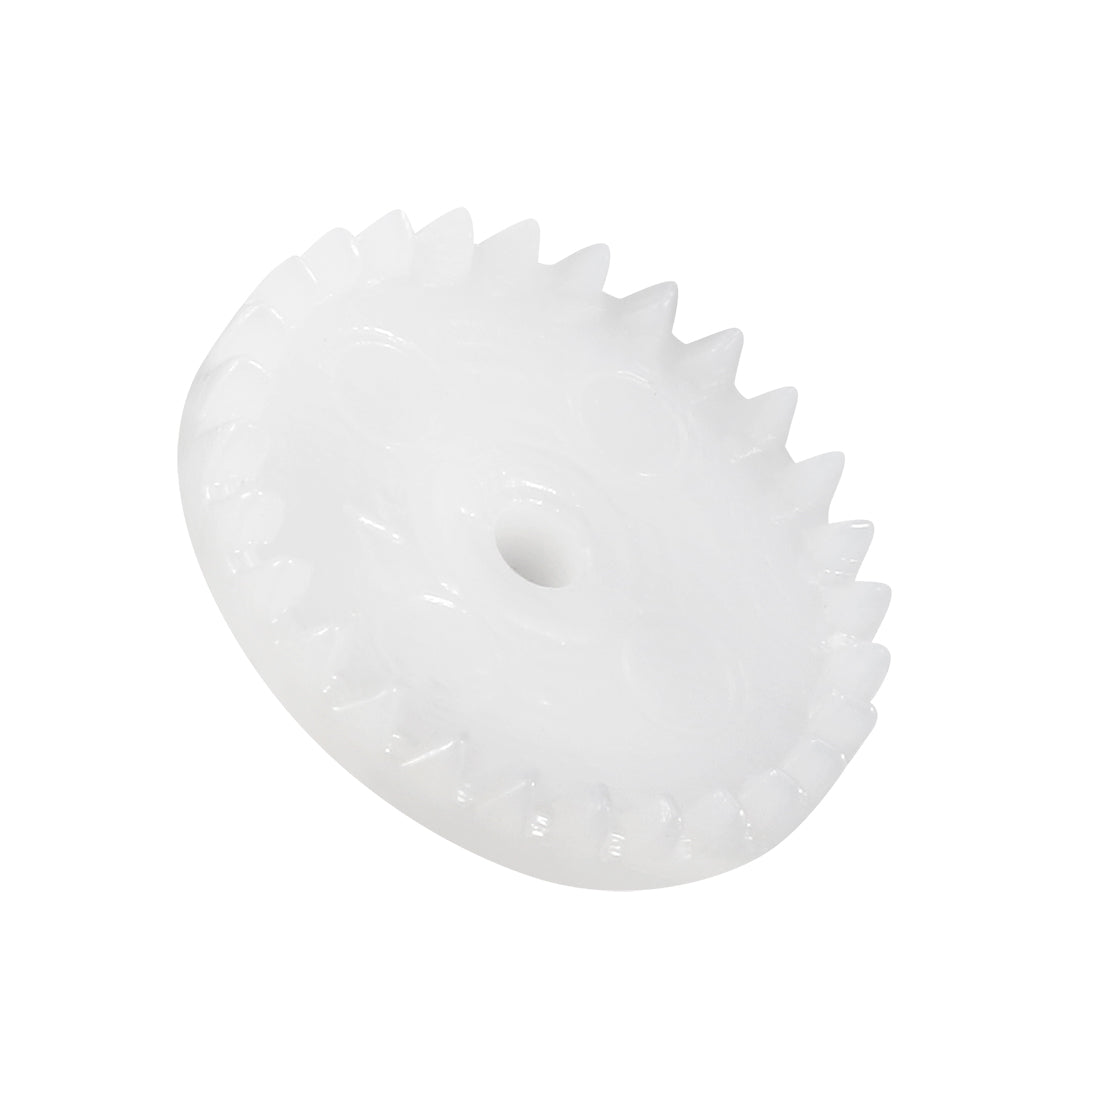 uxcell Uxcell 50Pcs C282A Plastic Gear Accessories with 28 Teeth for DIY Car Robot Motor